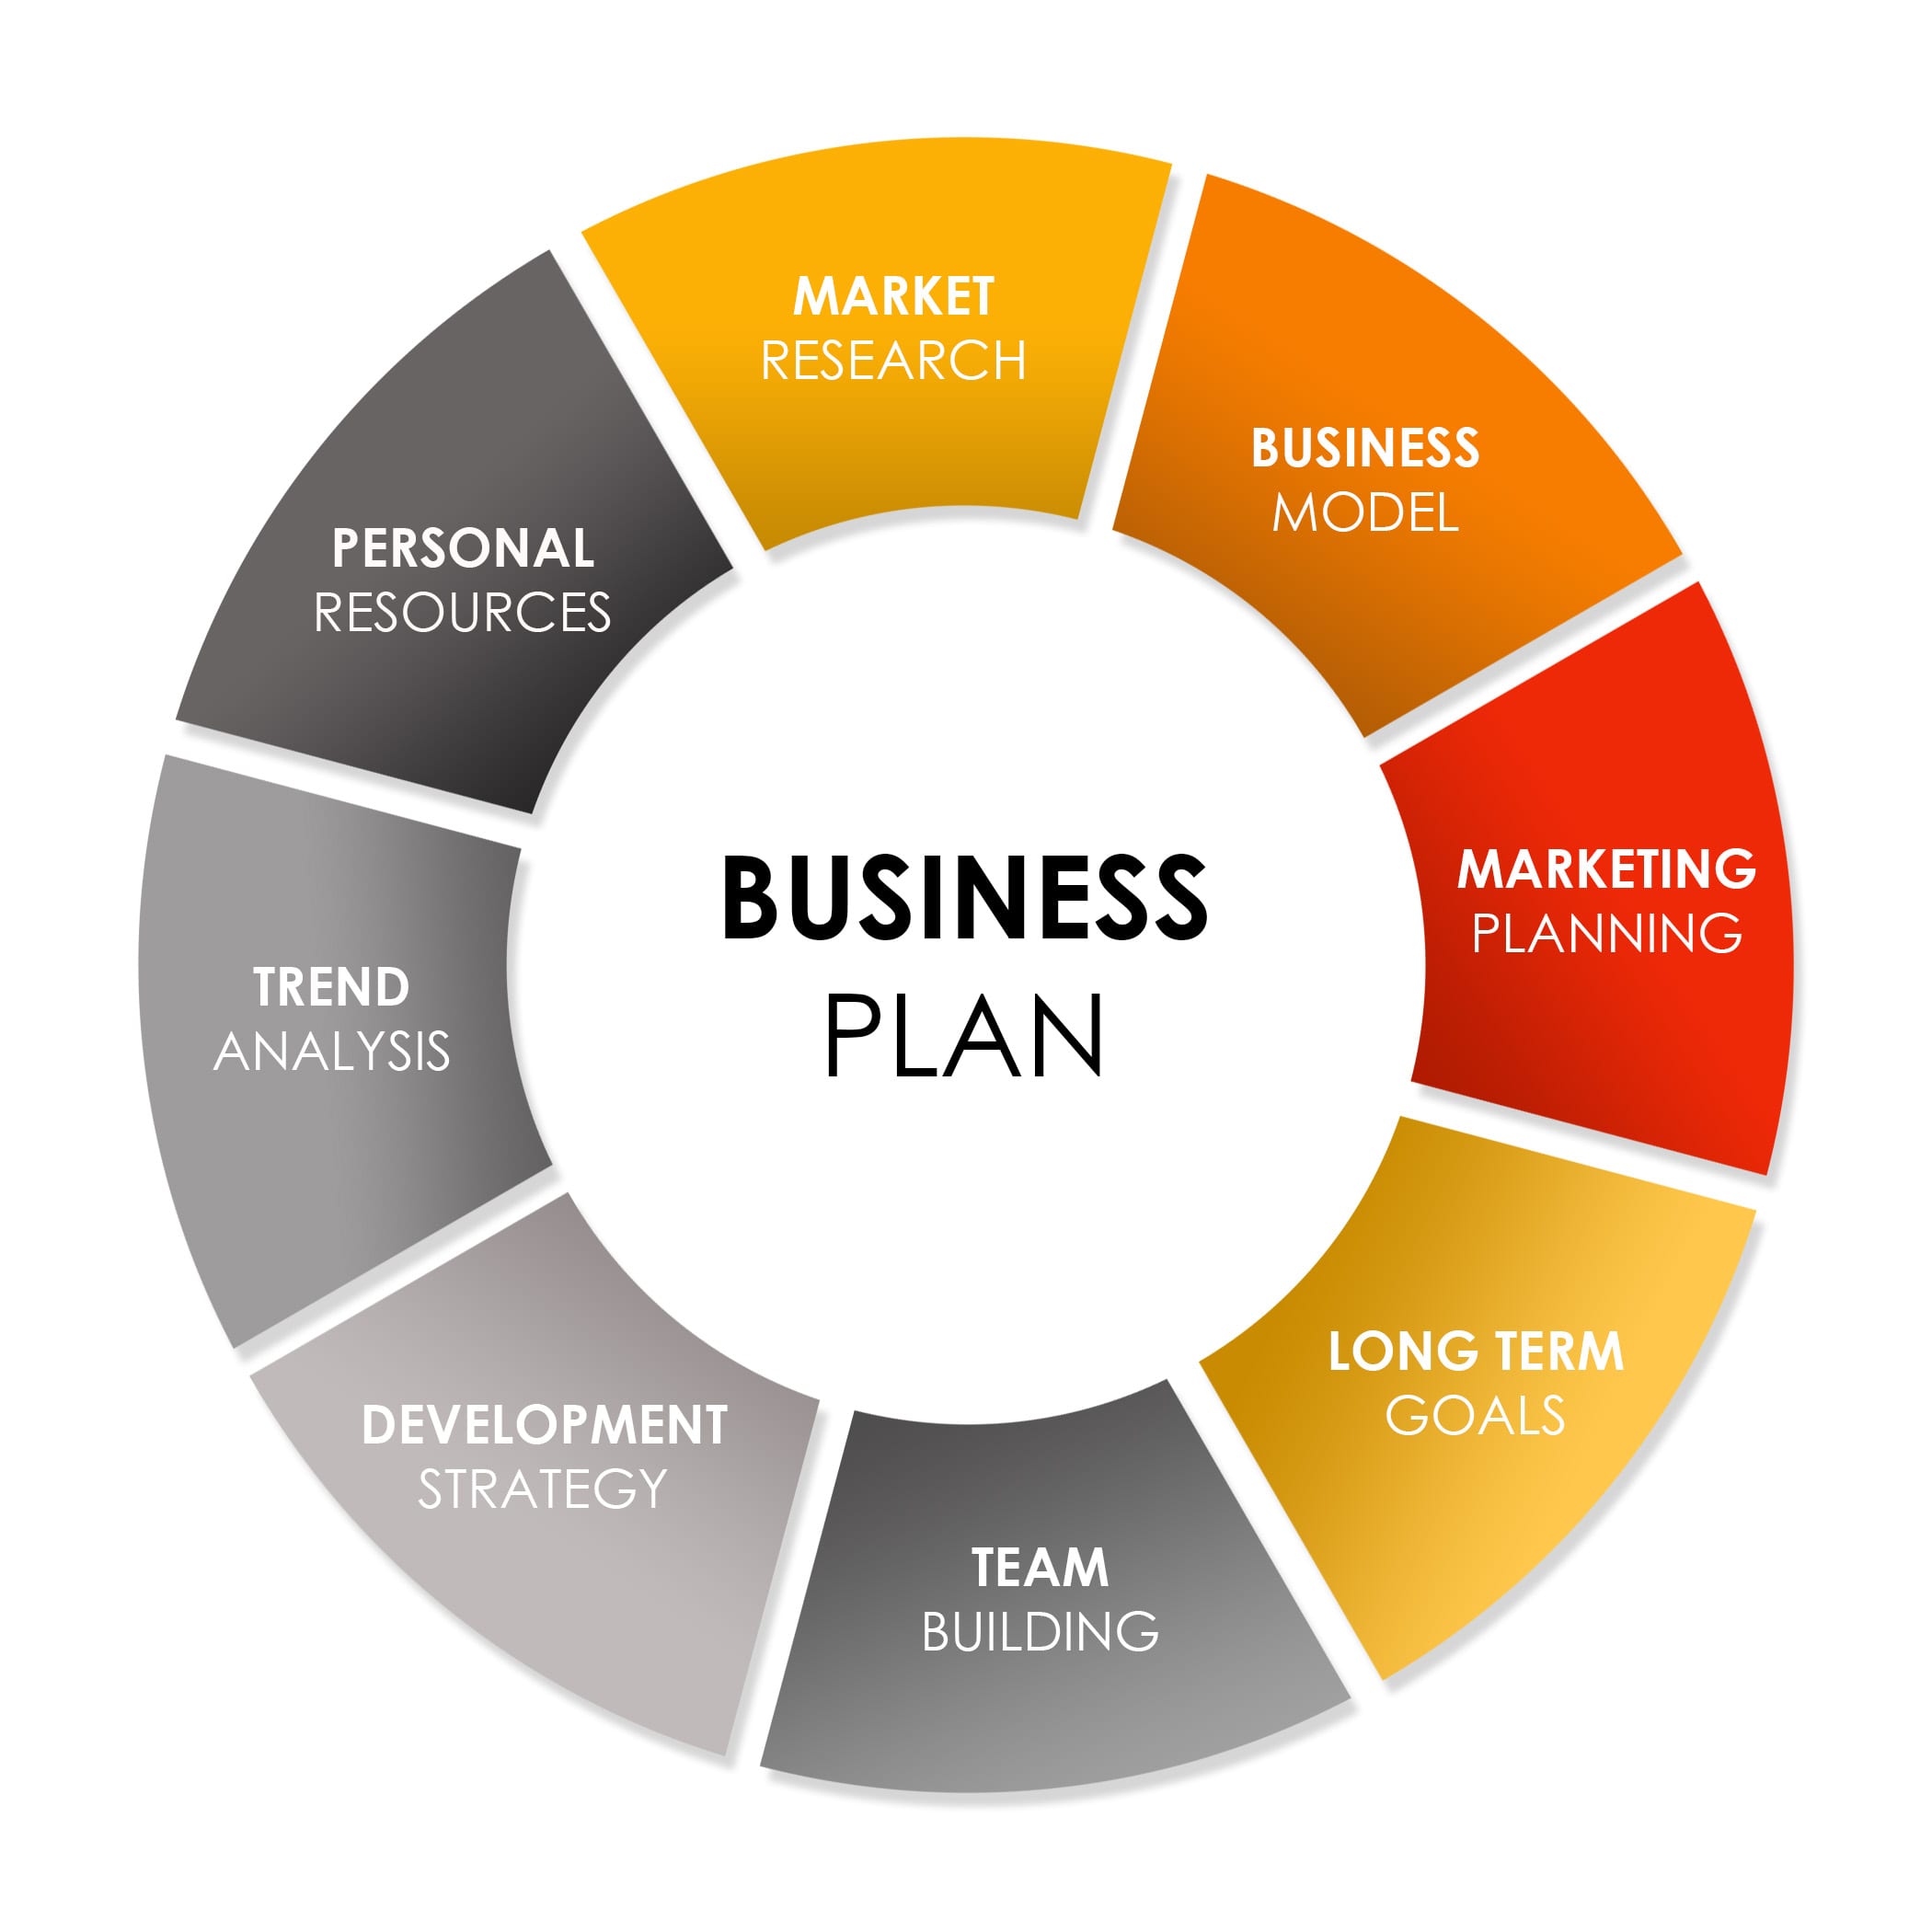 a business plan is important for businesses seeking funding